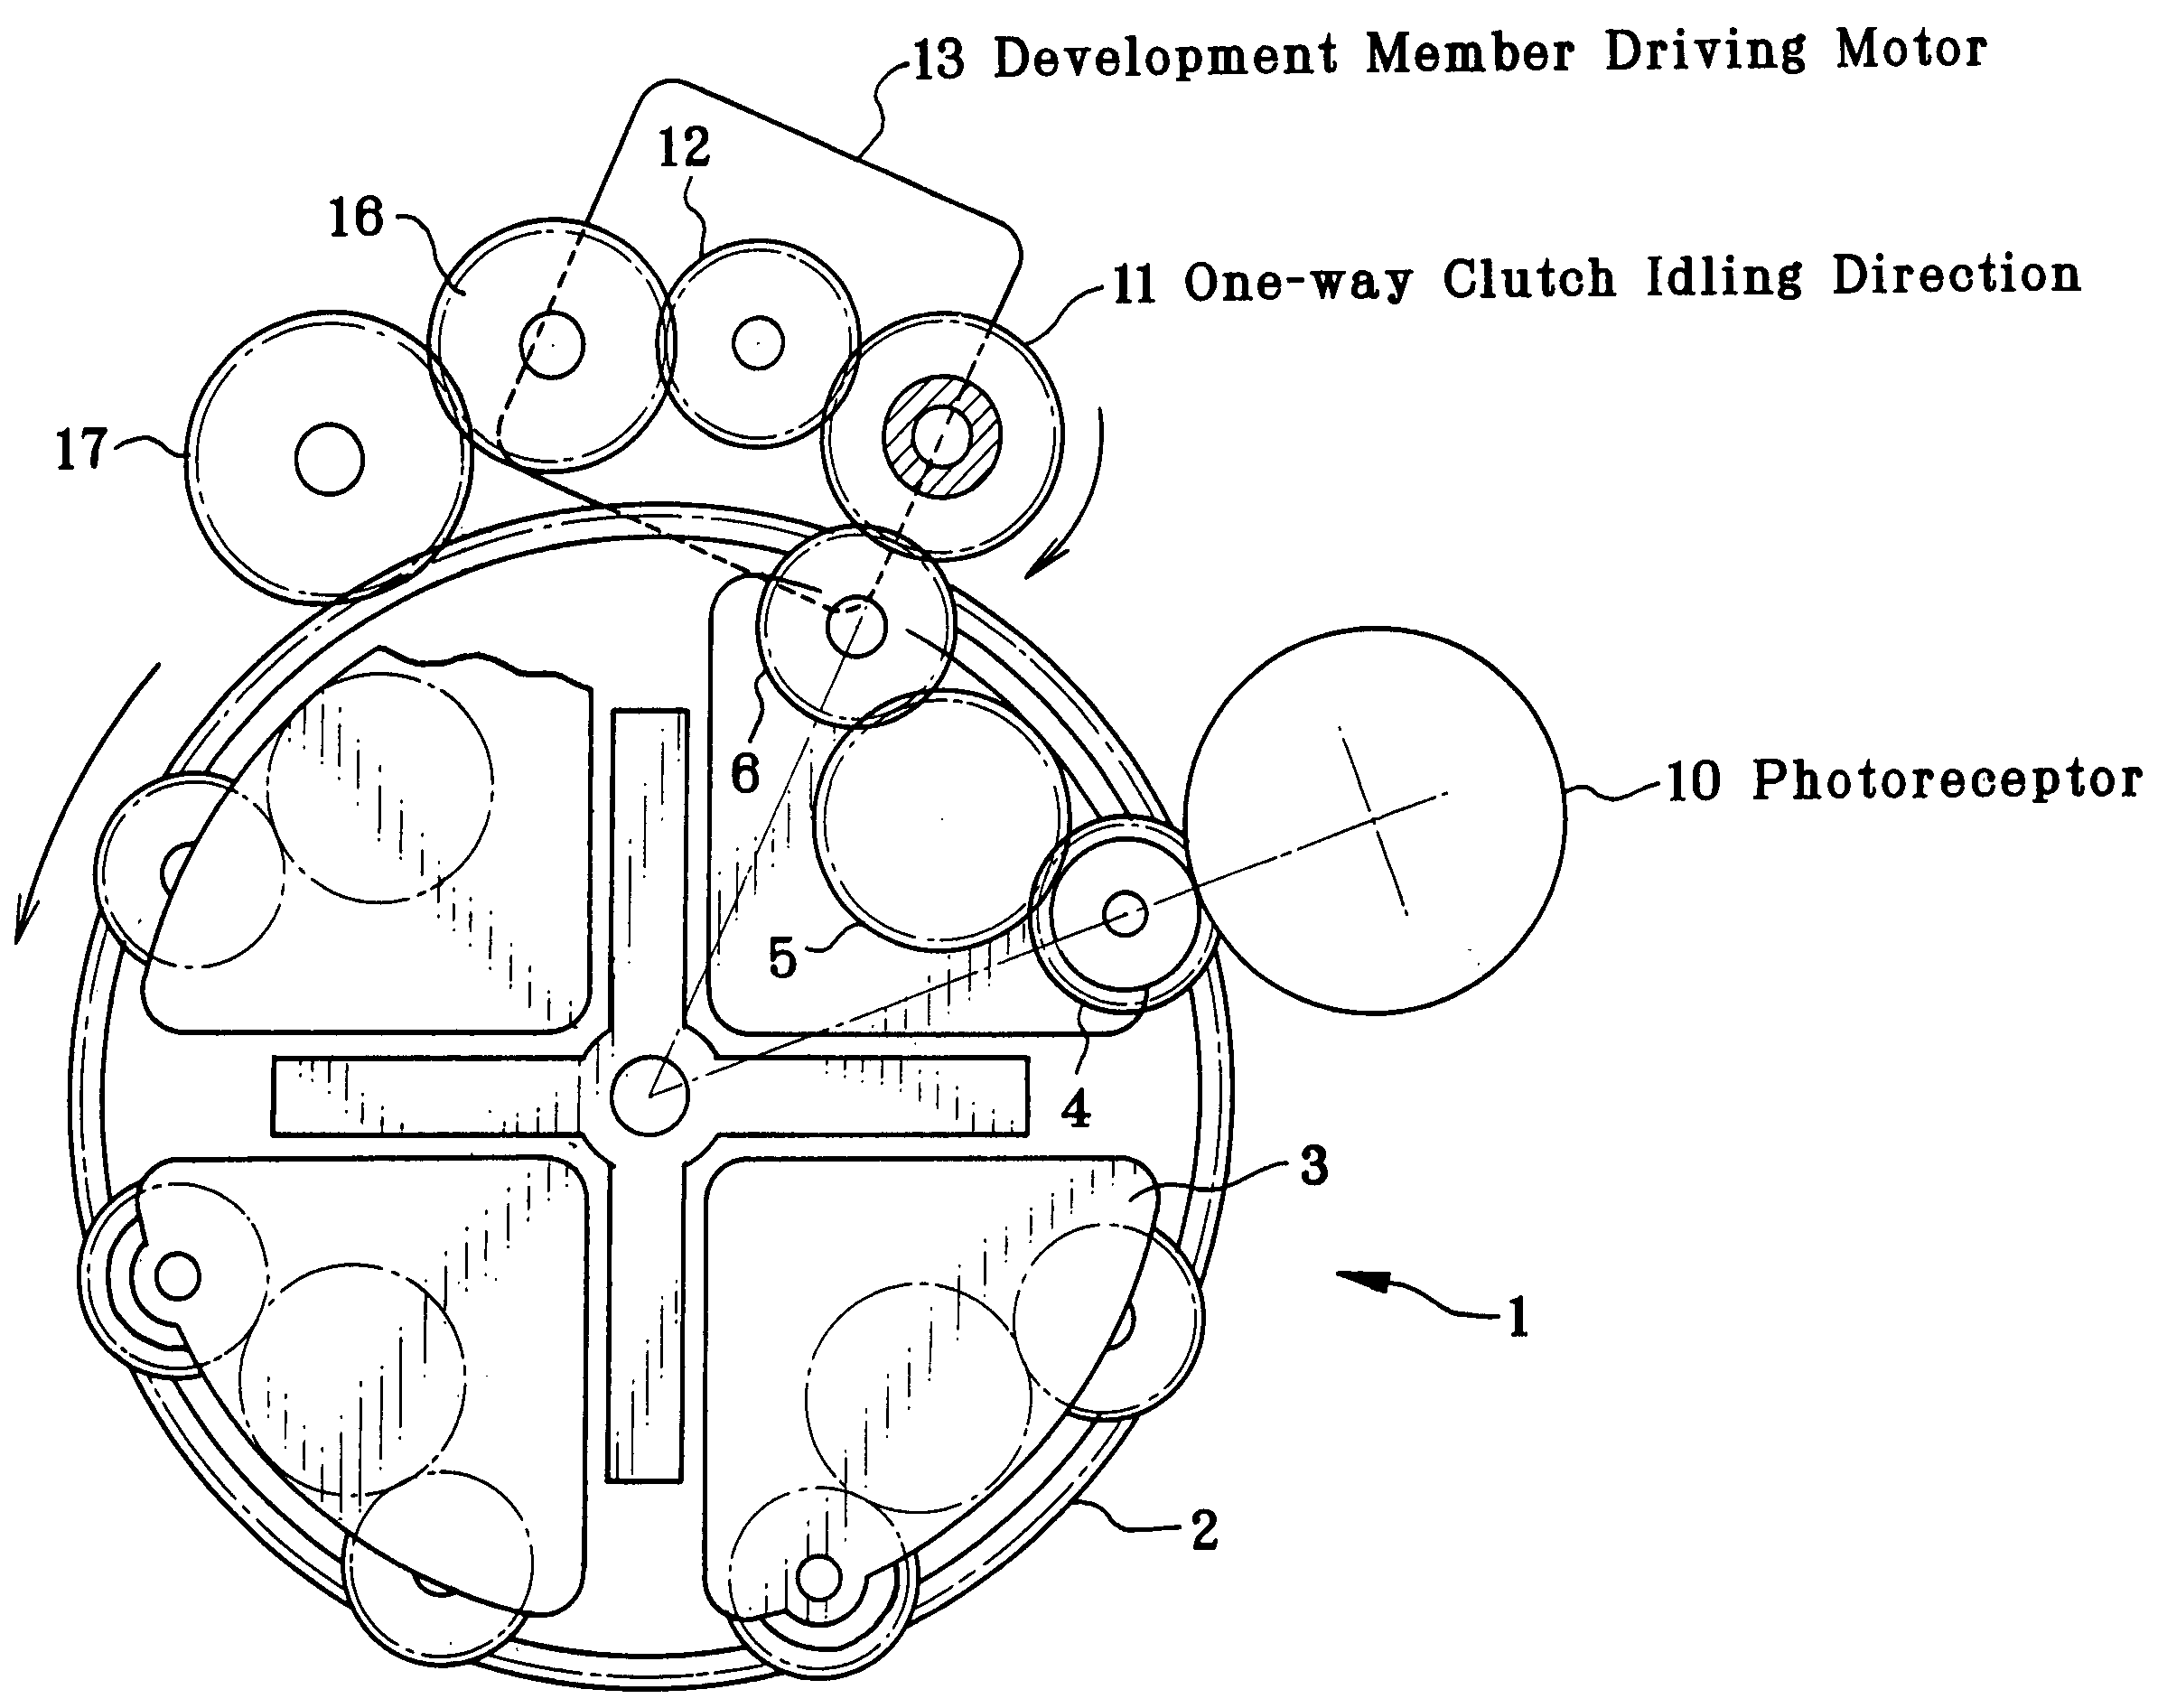 Rotary developing device